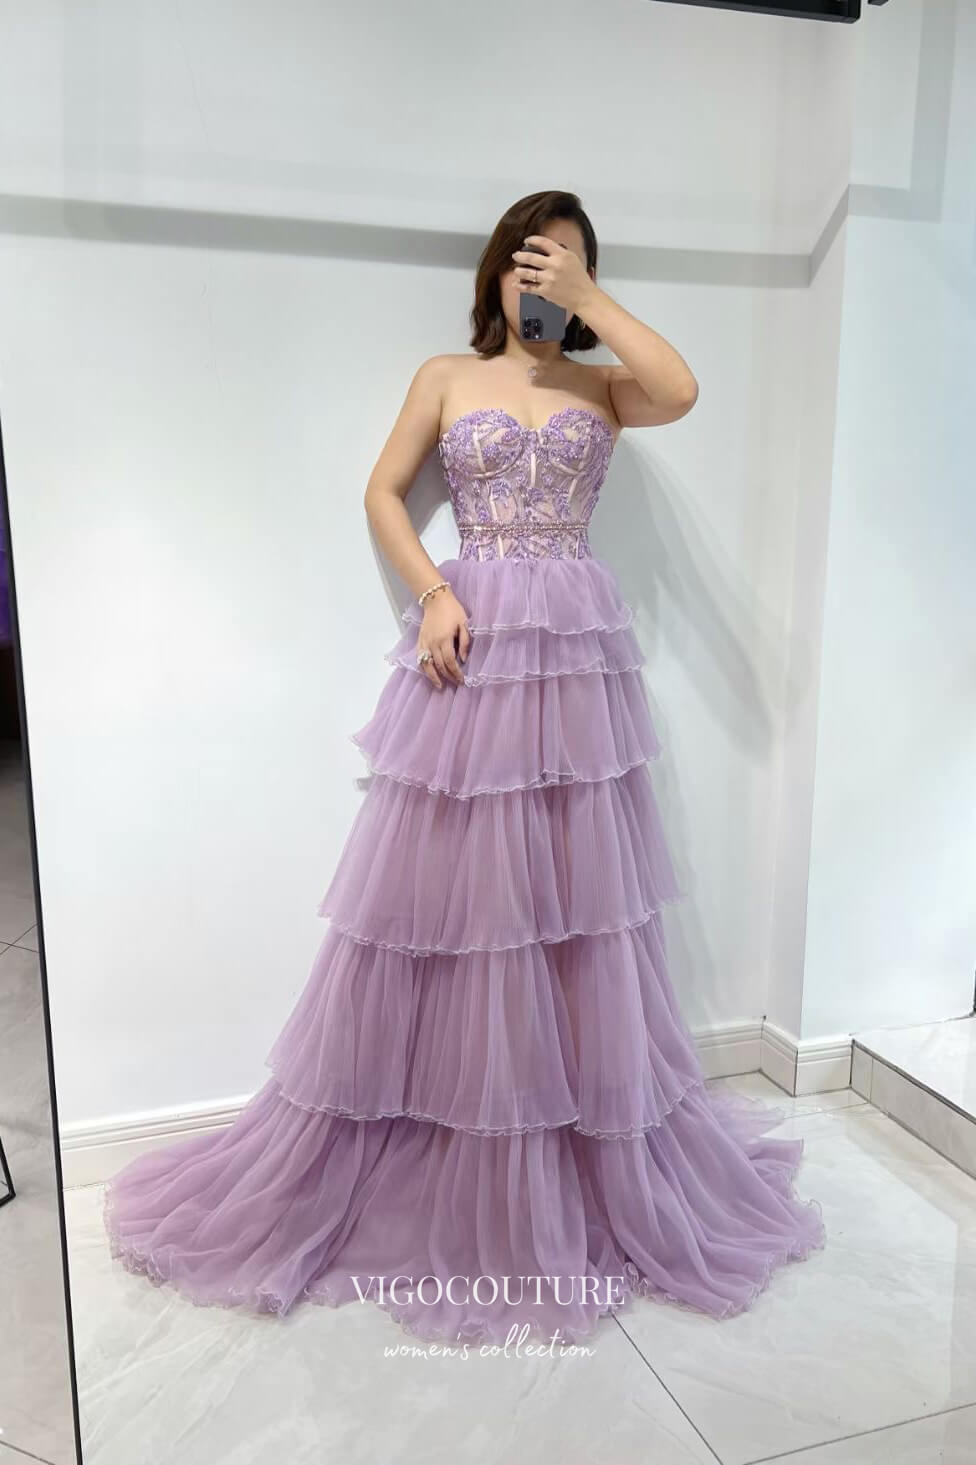 Lavender Strapless Prom Dress with Beaded Lace Applique Bodice and Ruffled Bottom 22251-Prom Dresses-vigocouture-Lavender-US4-vigocouture